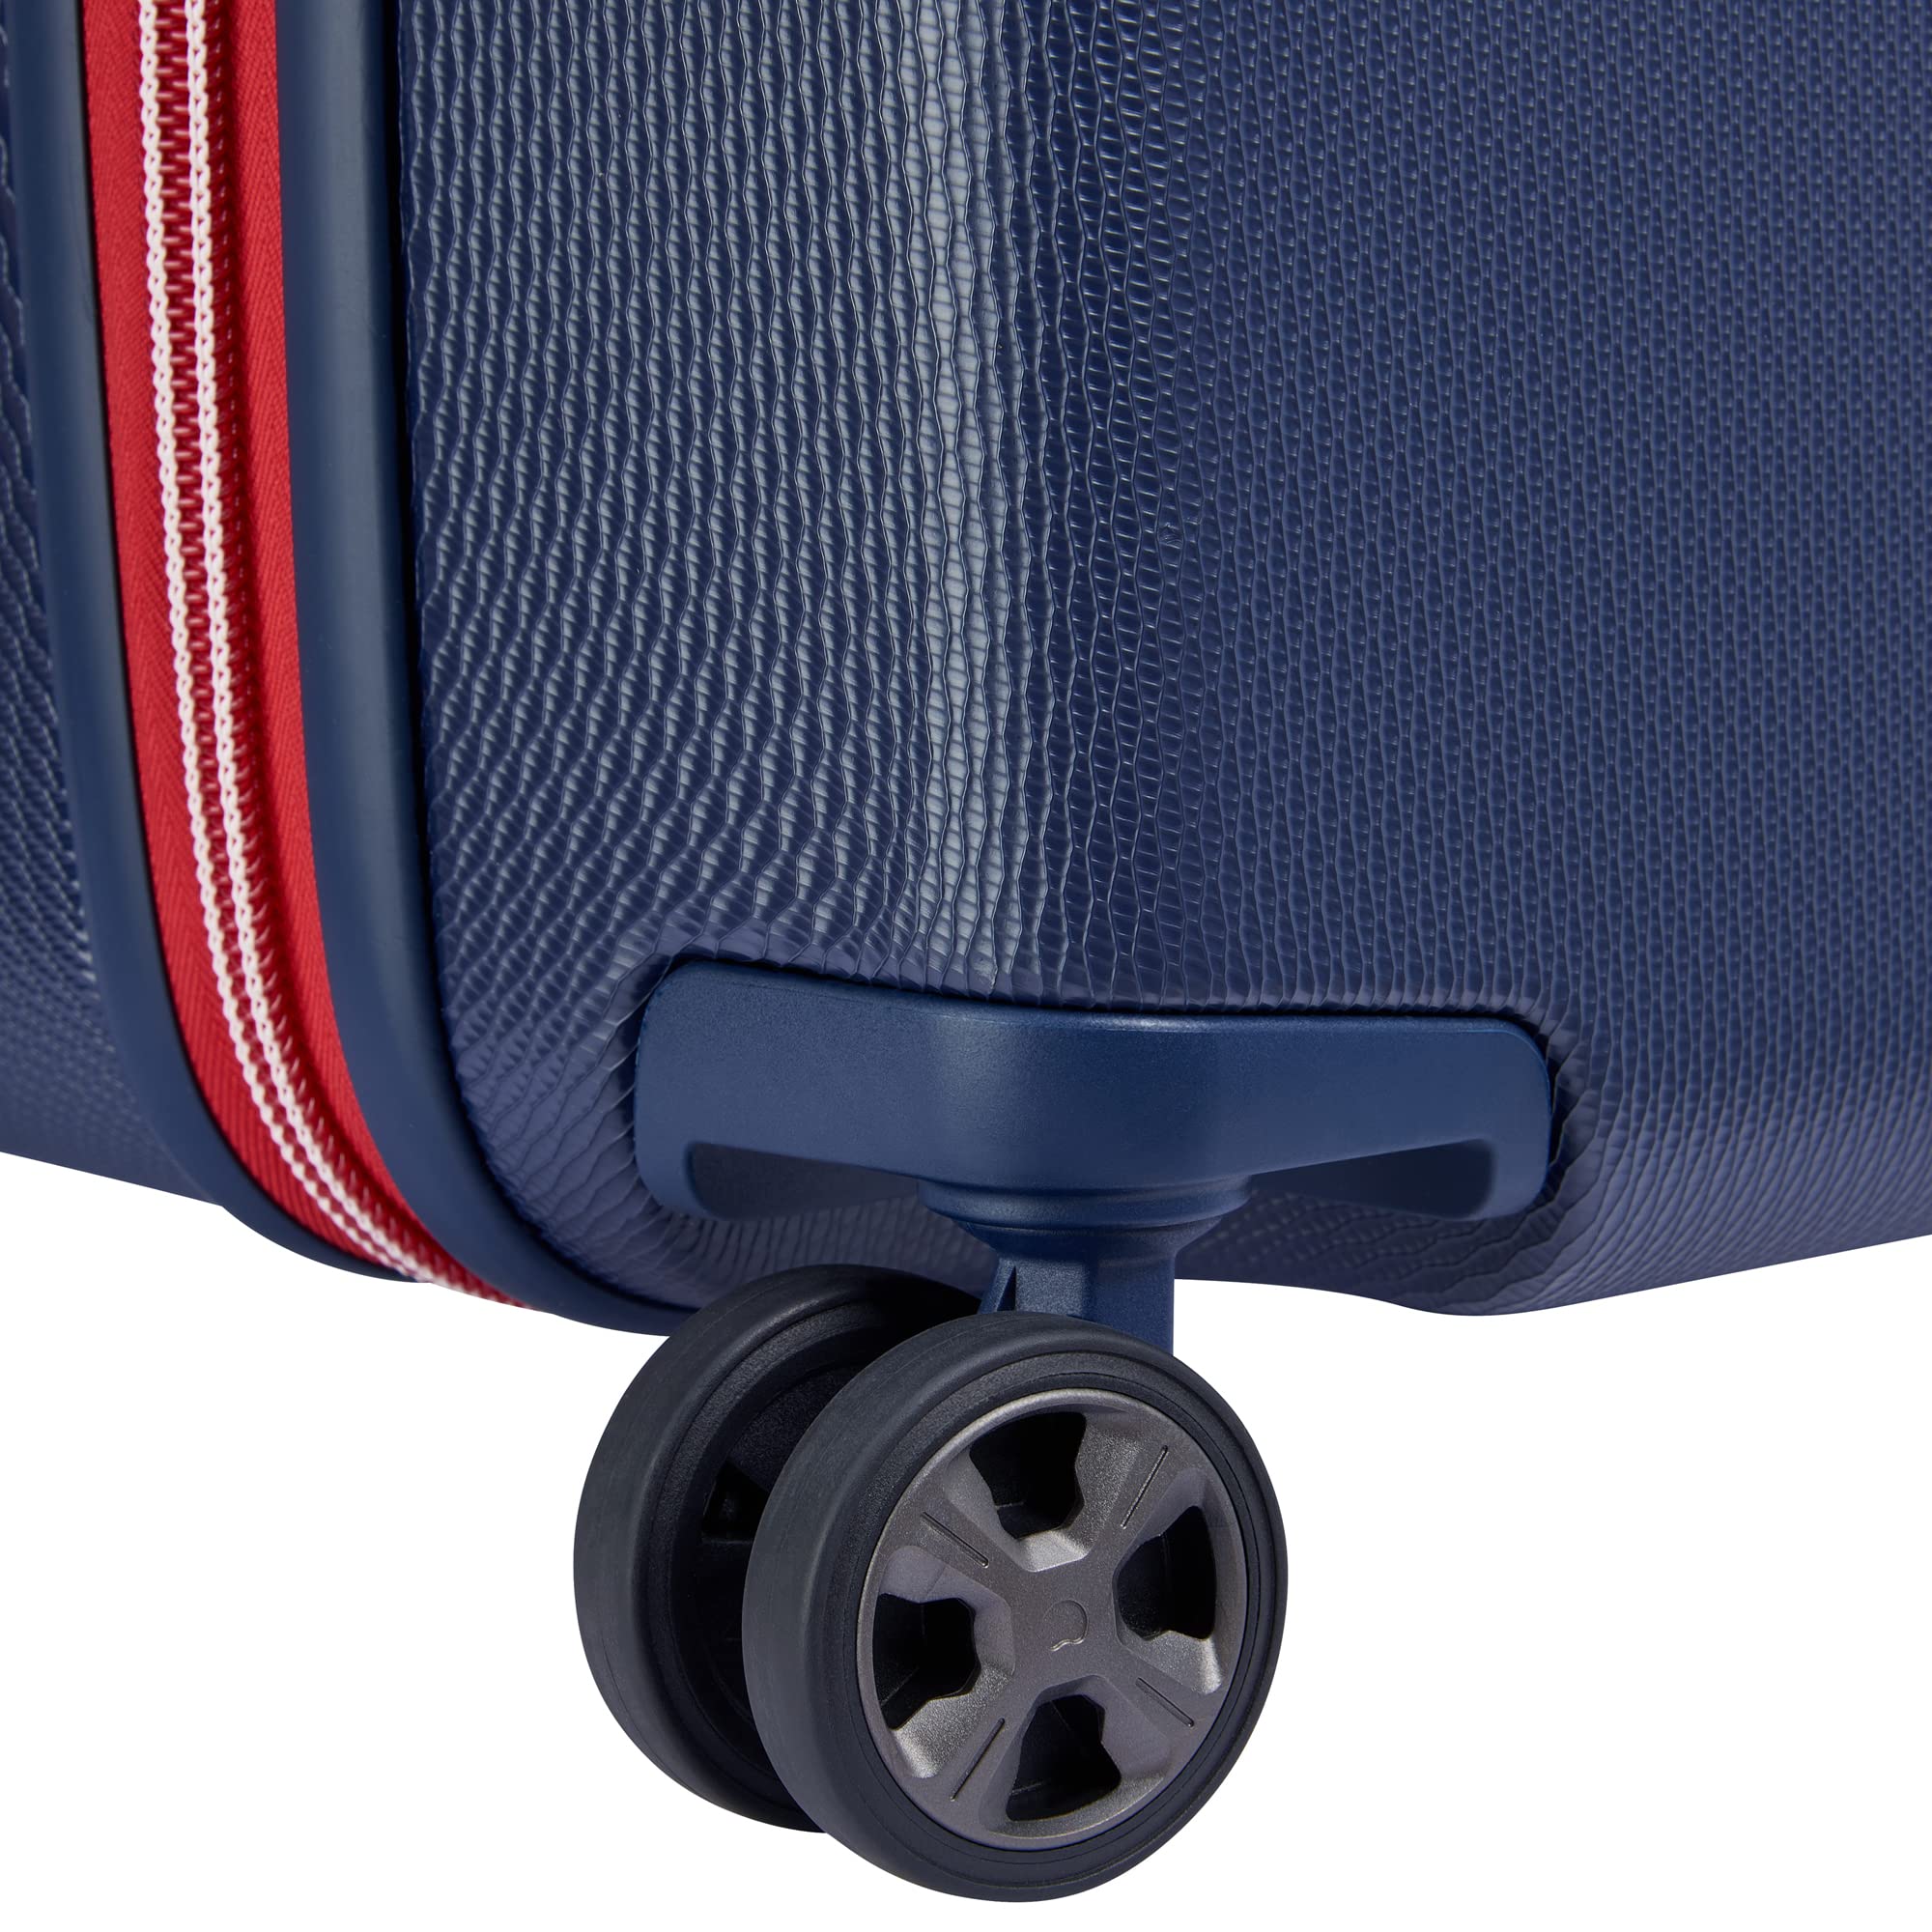 DELSEY Paris Chatelet Hardside 2.0 Luggage with Spinner Wheels, Navy, Carry-on 21 Inch